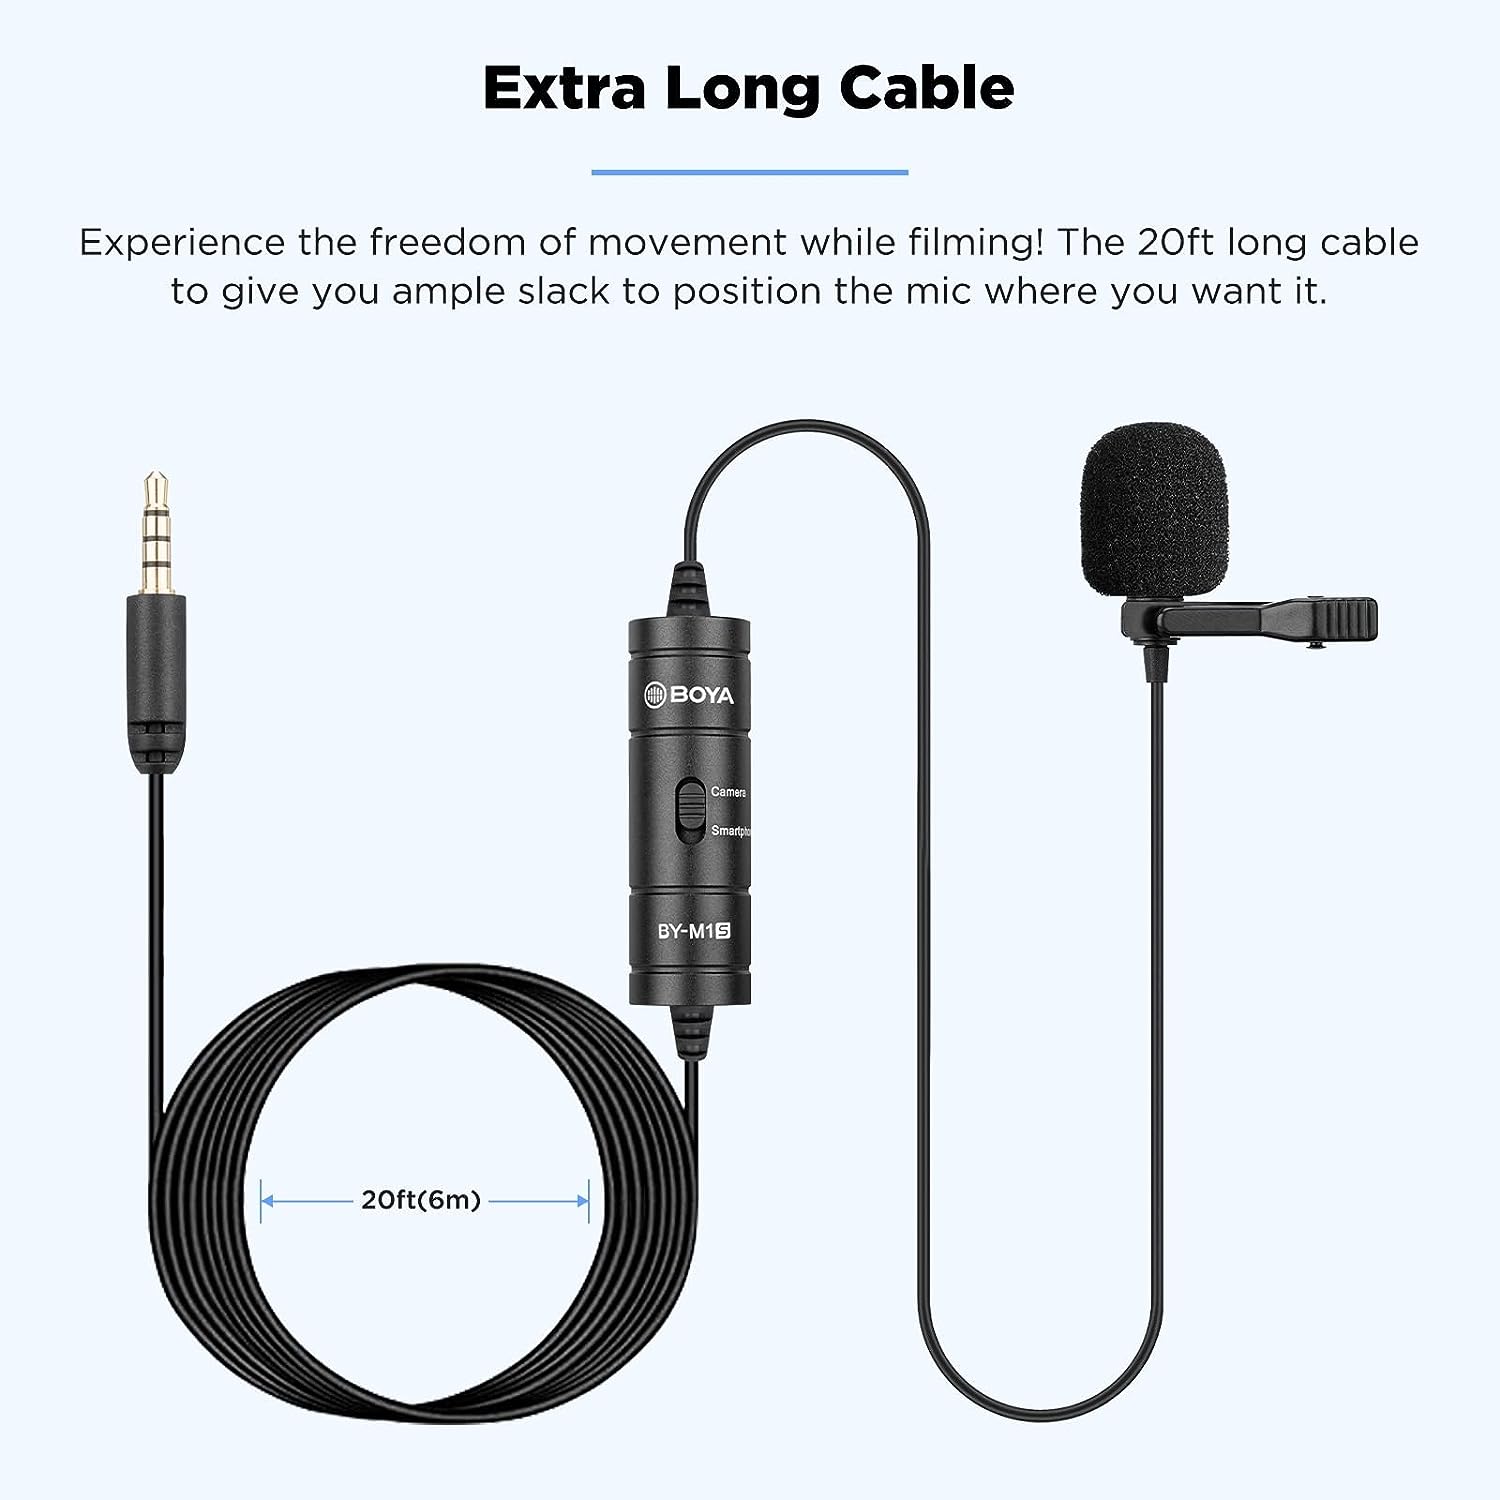 Boya BY-M1S Universal Lavalier Microphone Without Battery